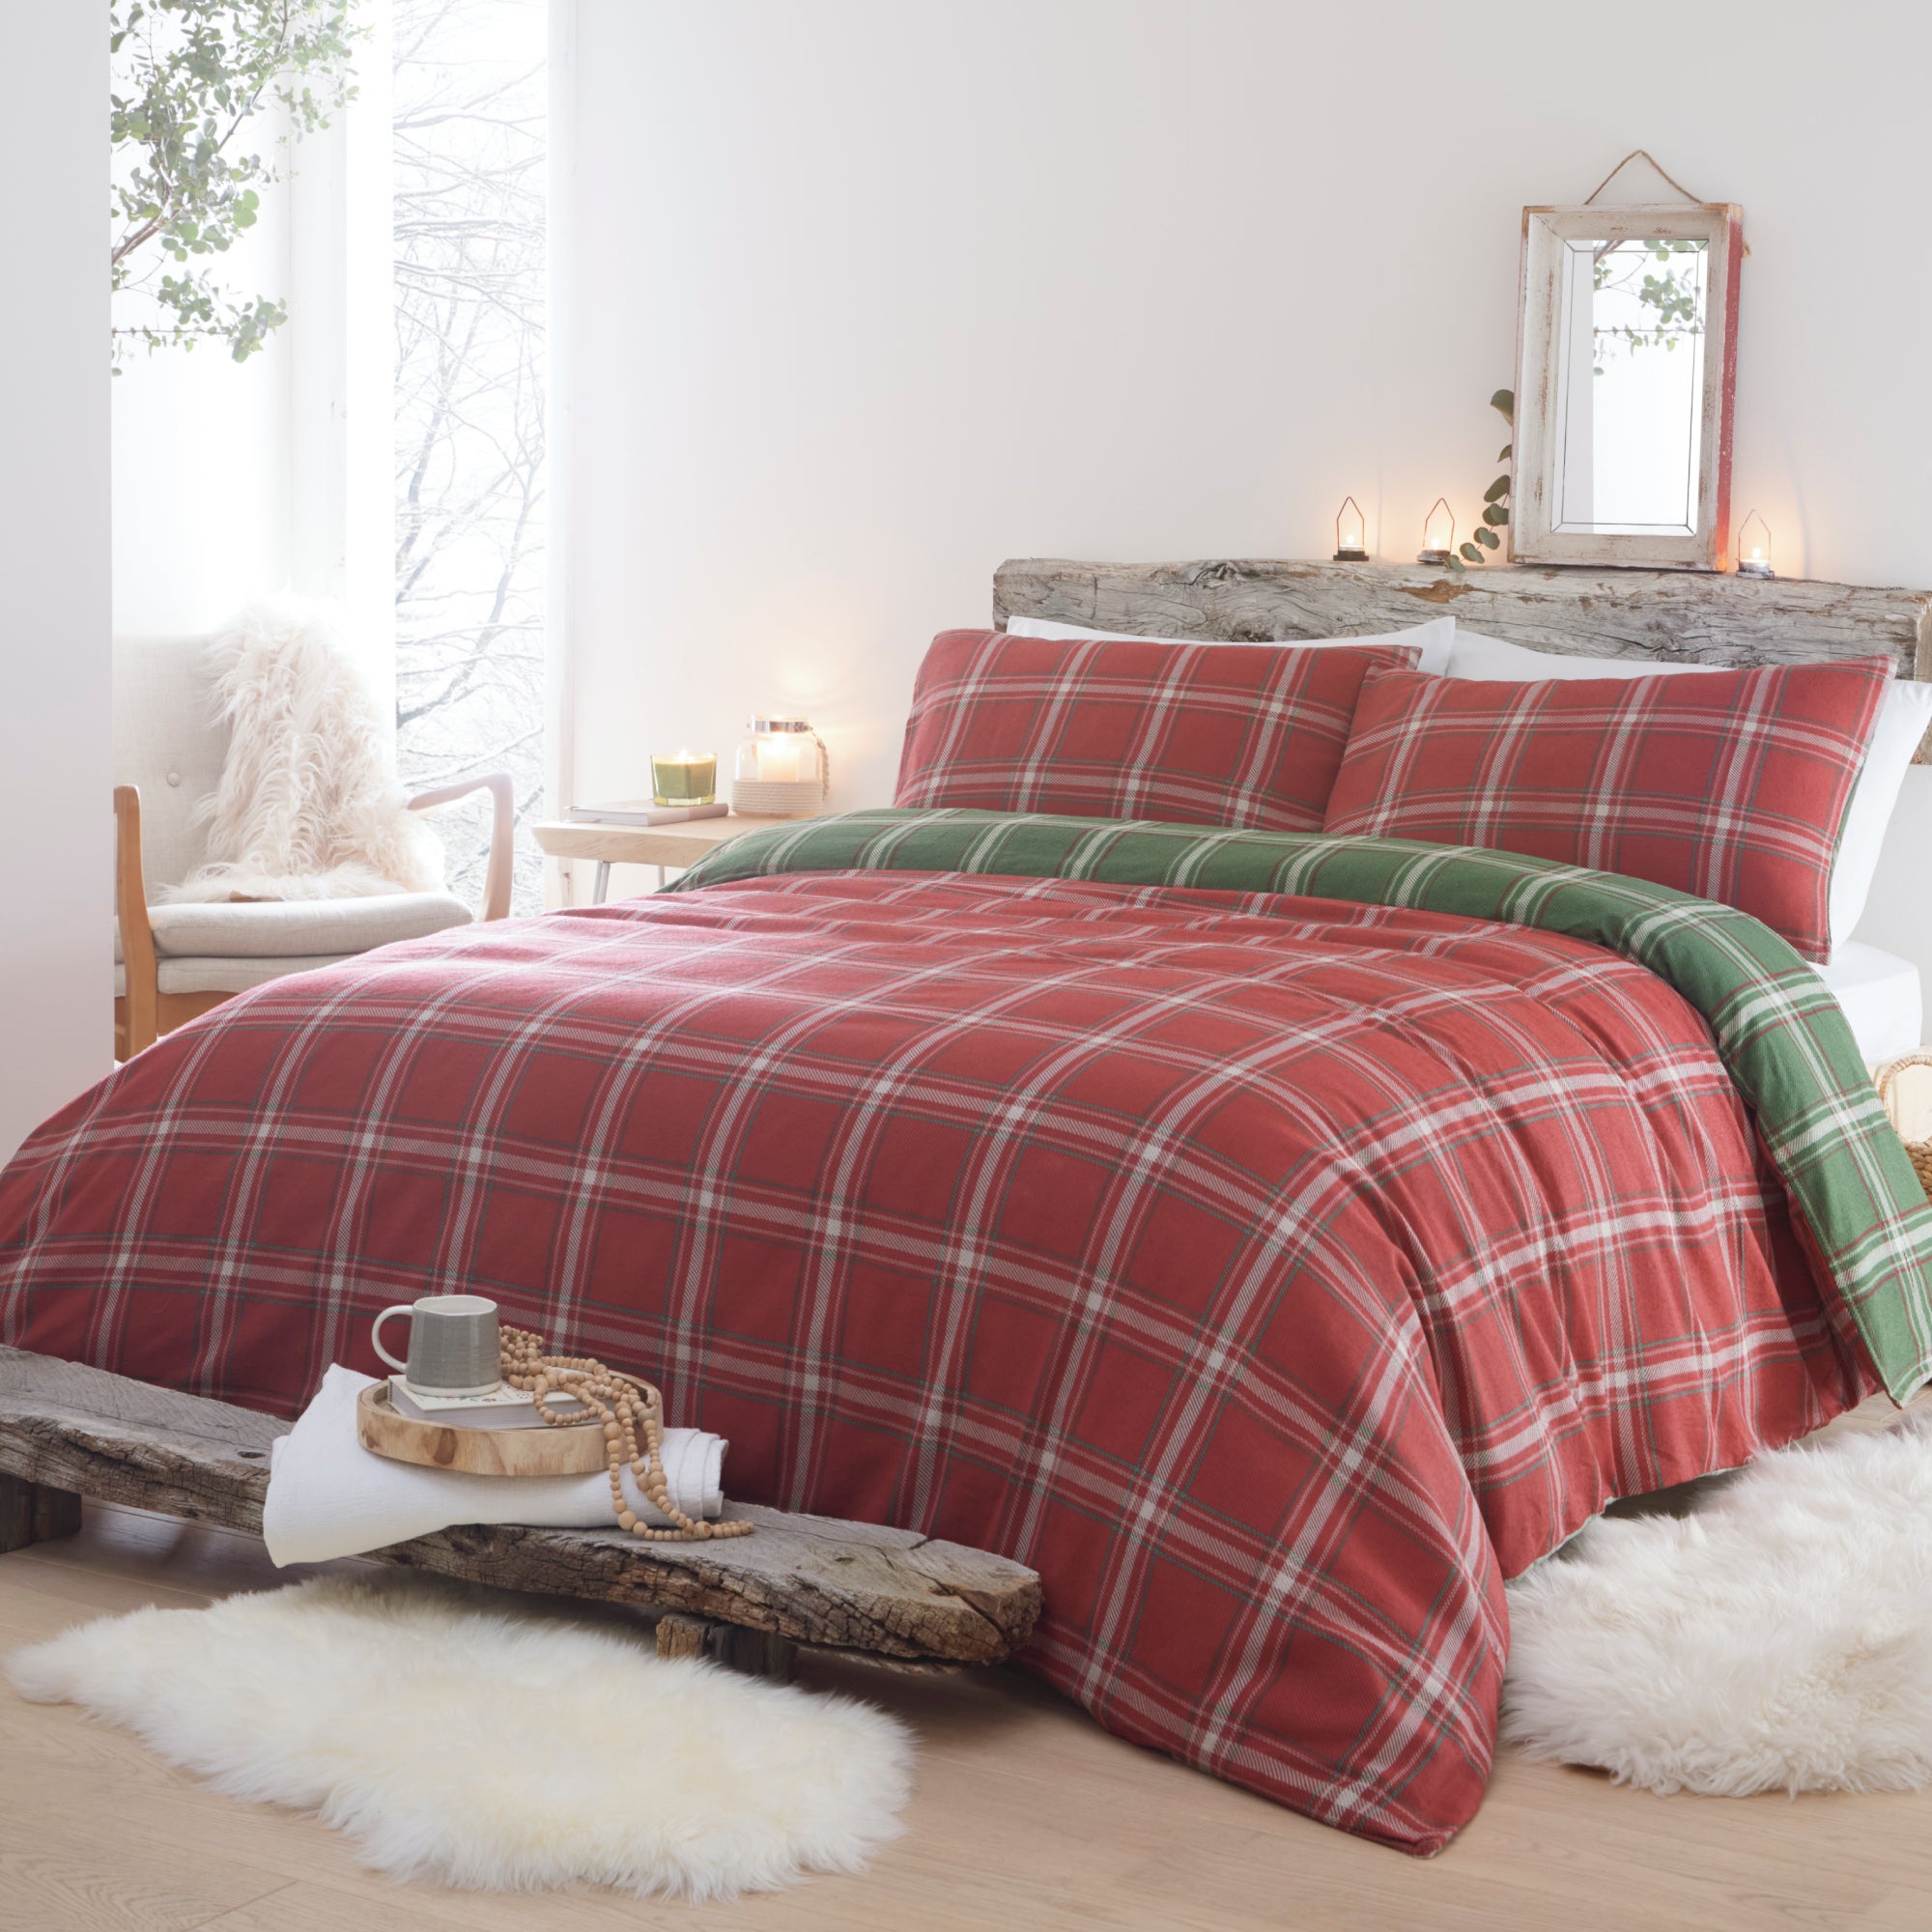 Aviemore Checked Duvet Cover And Pillowcase Set Red Red